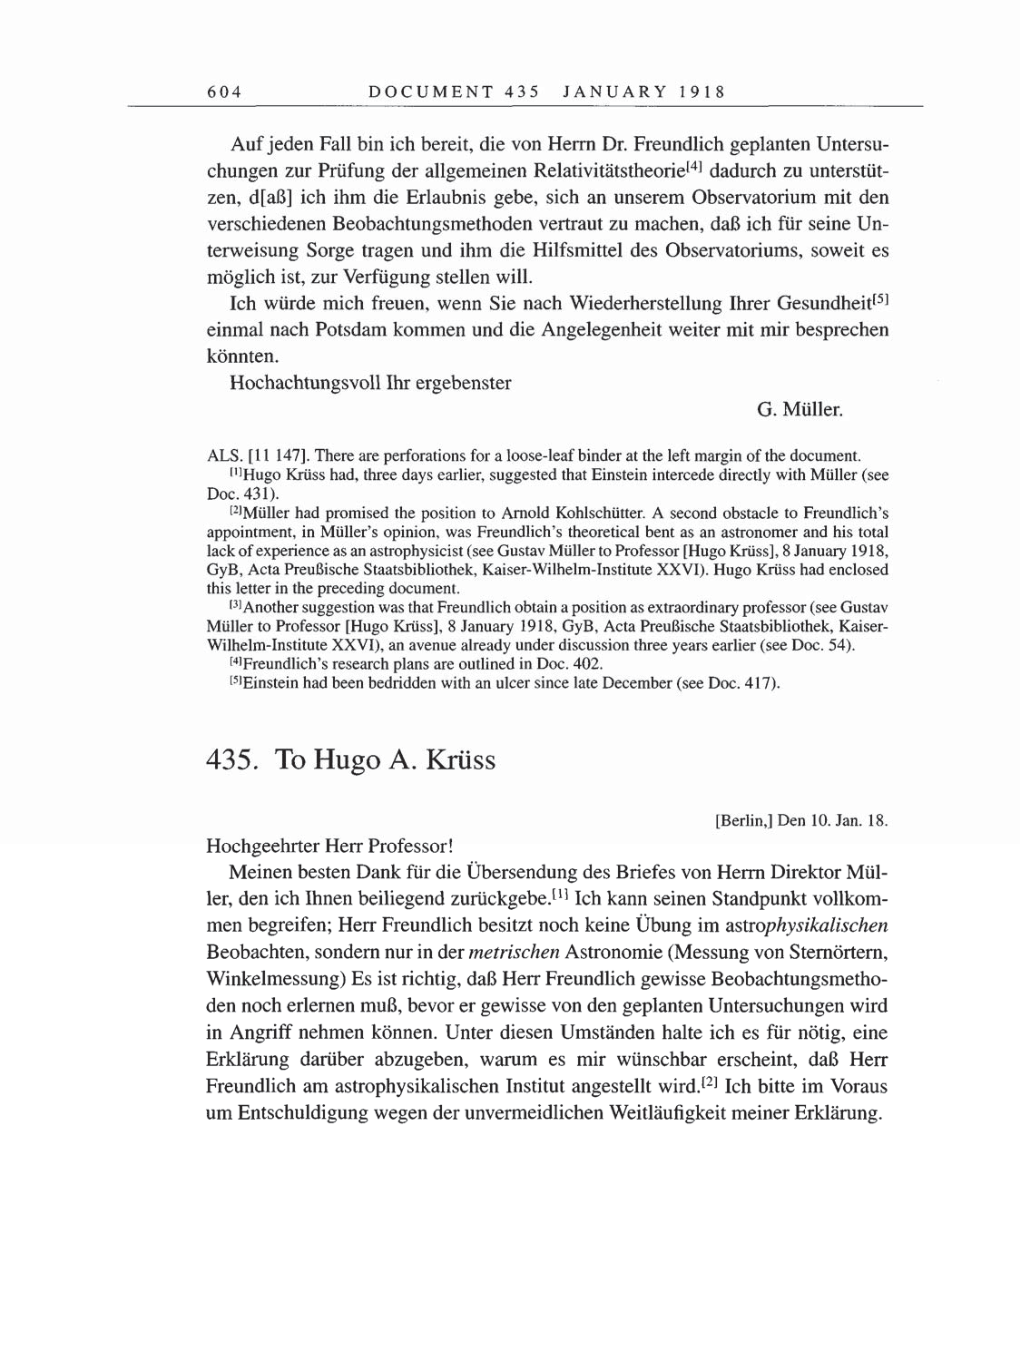 Volume 8, Part B: The Berlin Years: Correspondence 1918 page 604